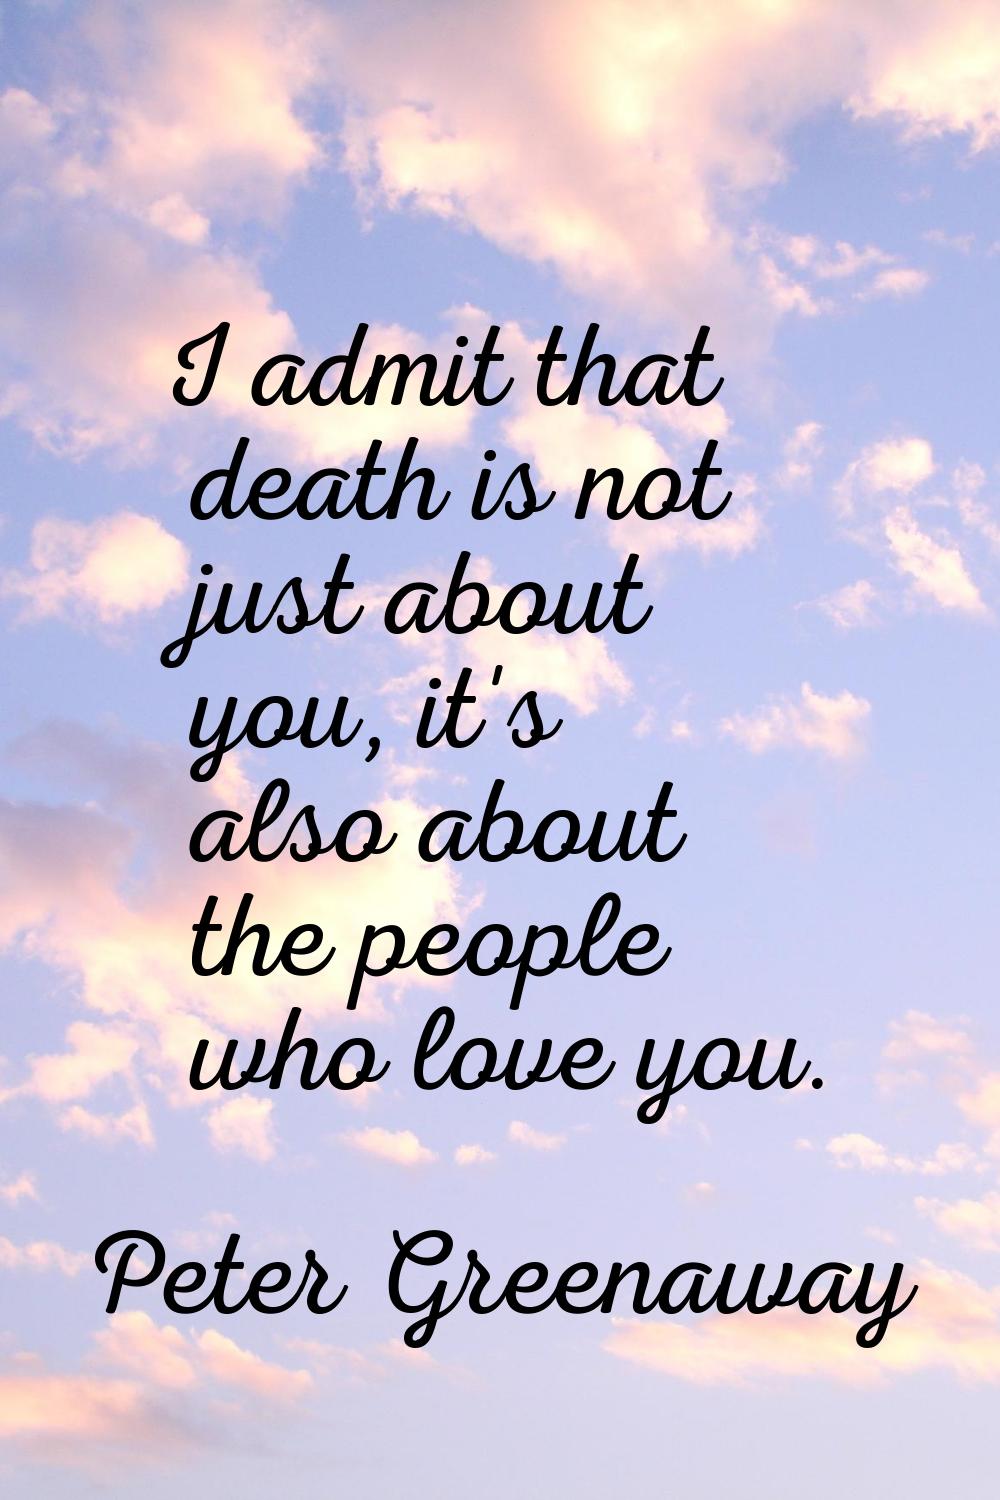 I admit that death is not just about you, it's also about the people who love you.